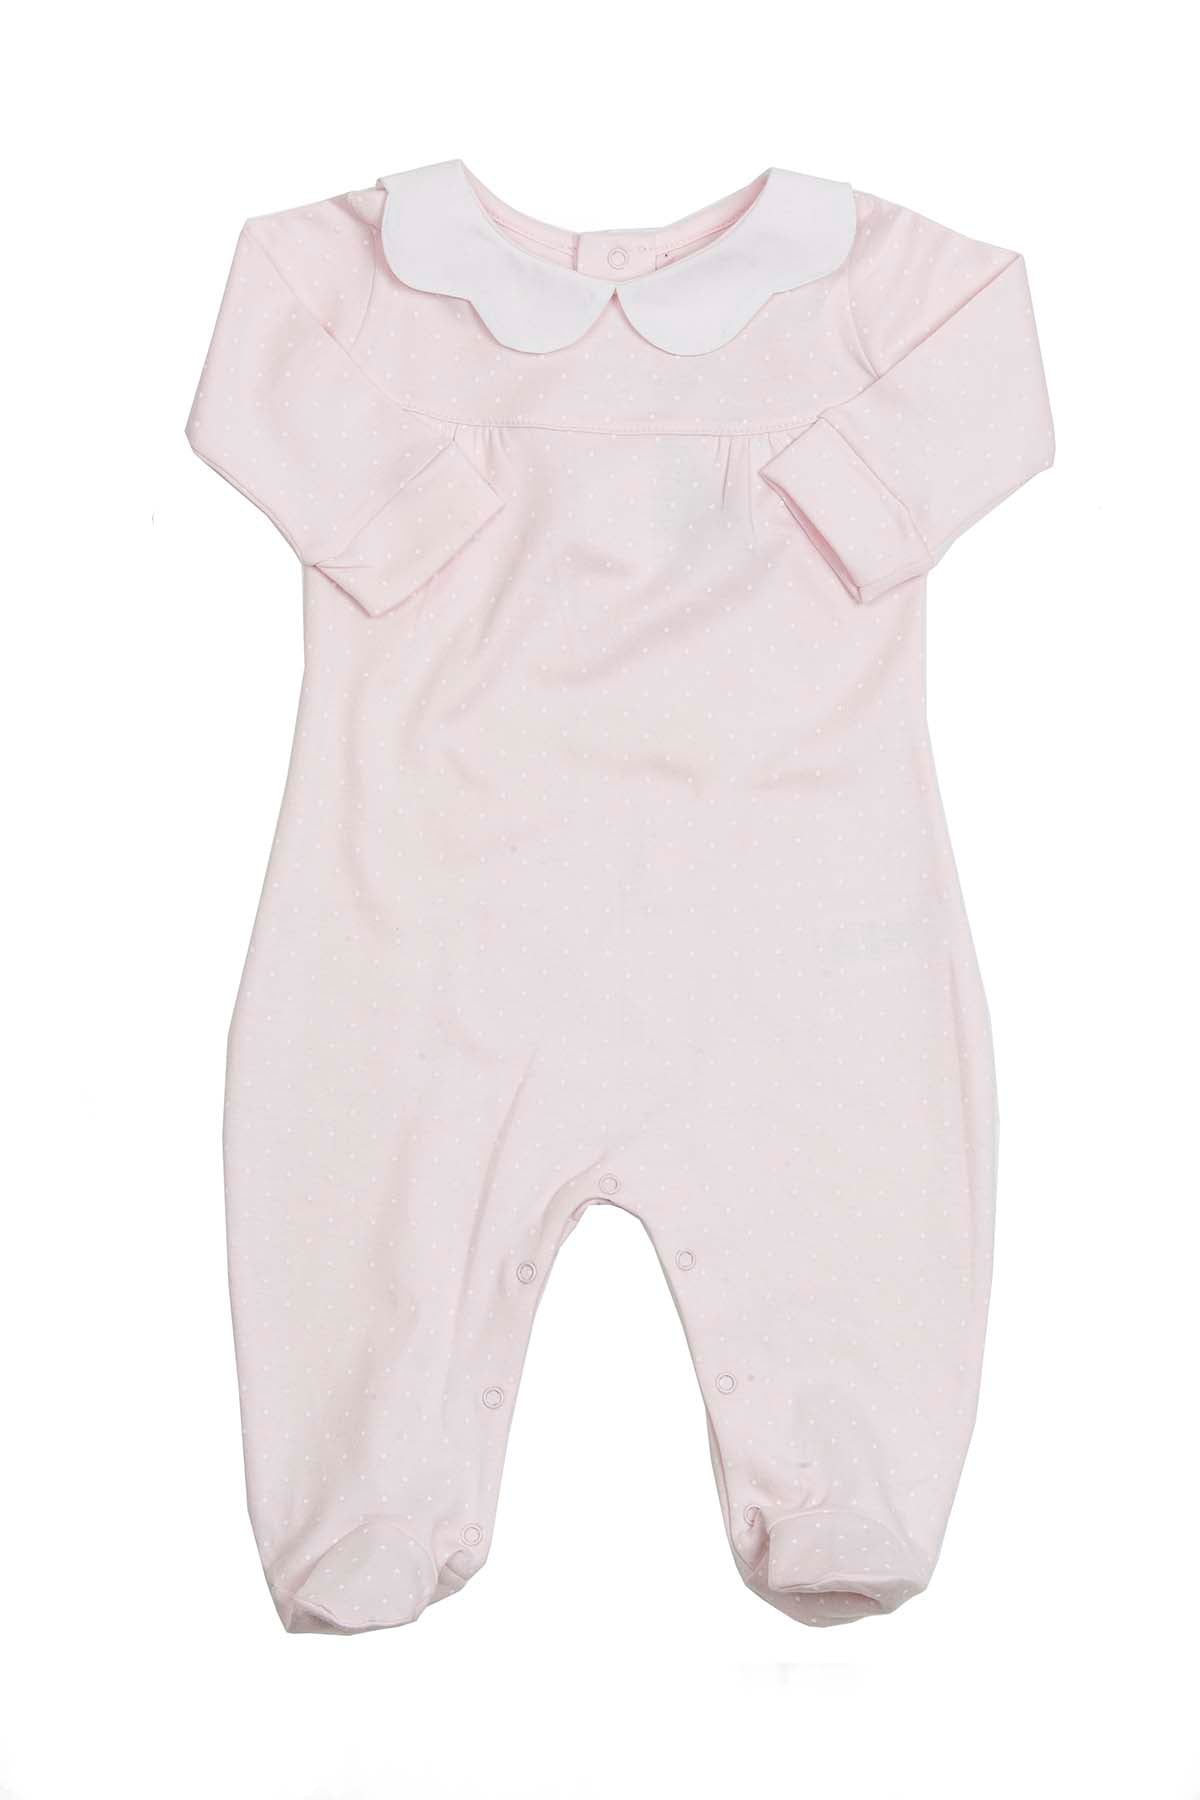 Cotton Pink Pijama with white dots and scallop neck Pima Cotton